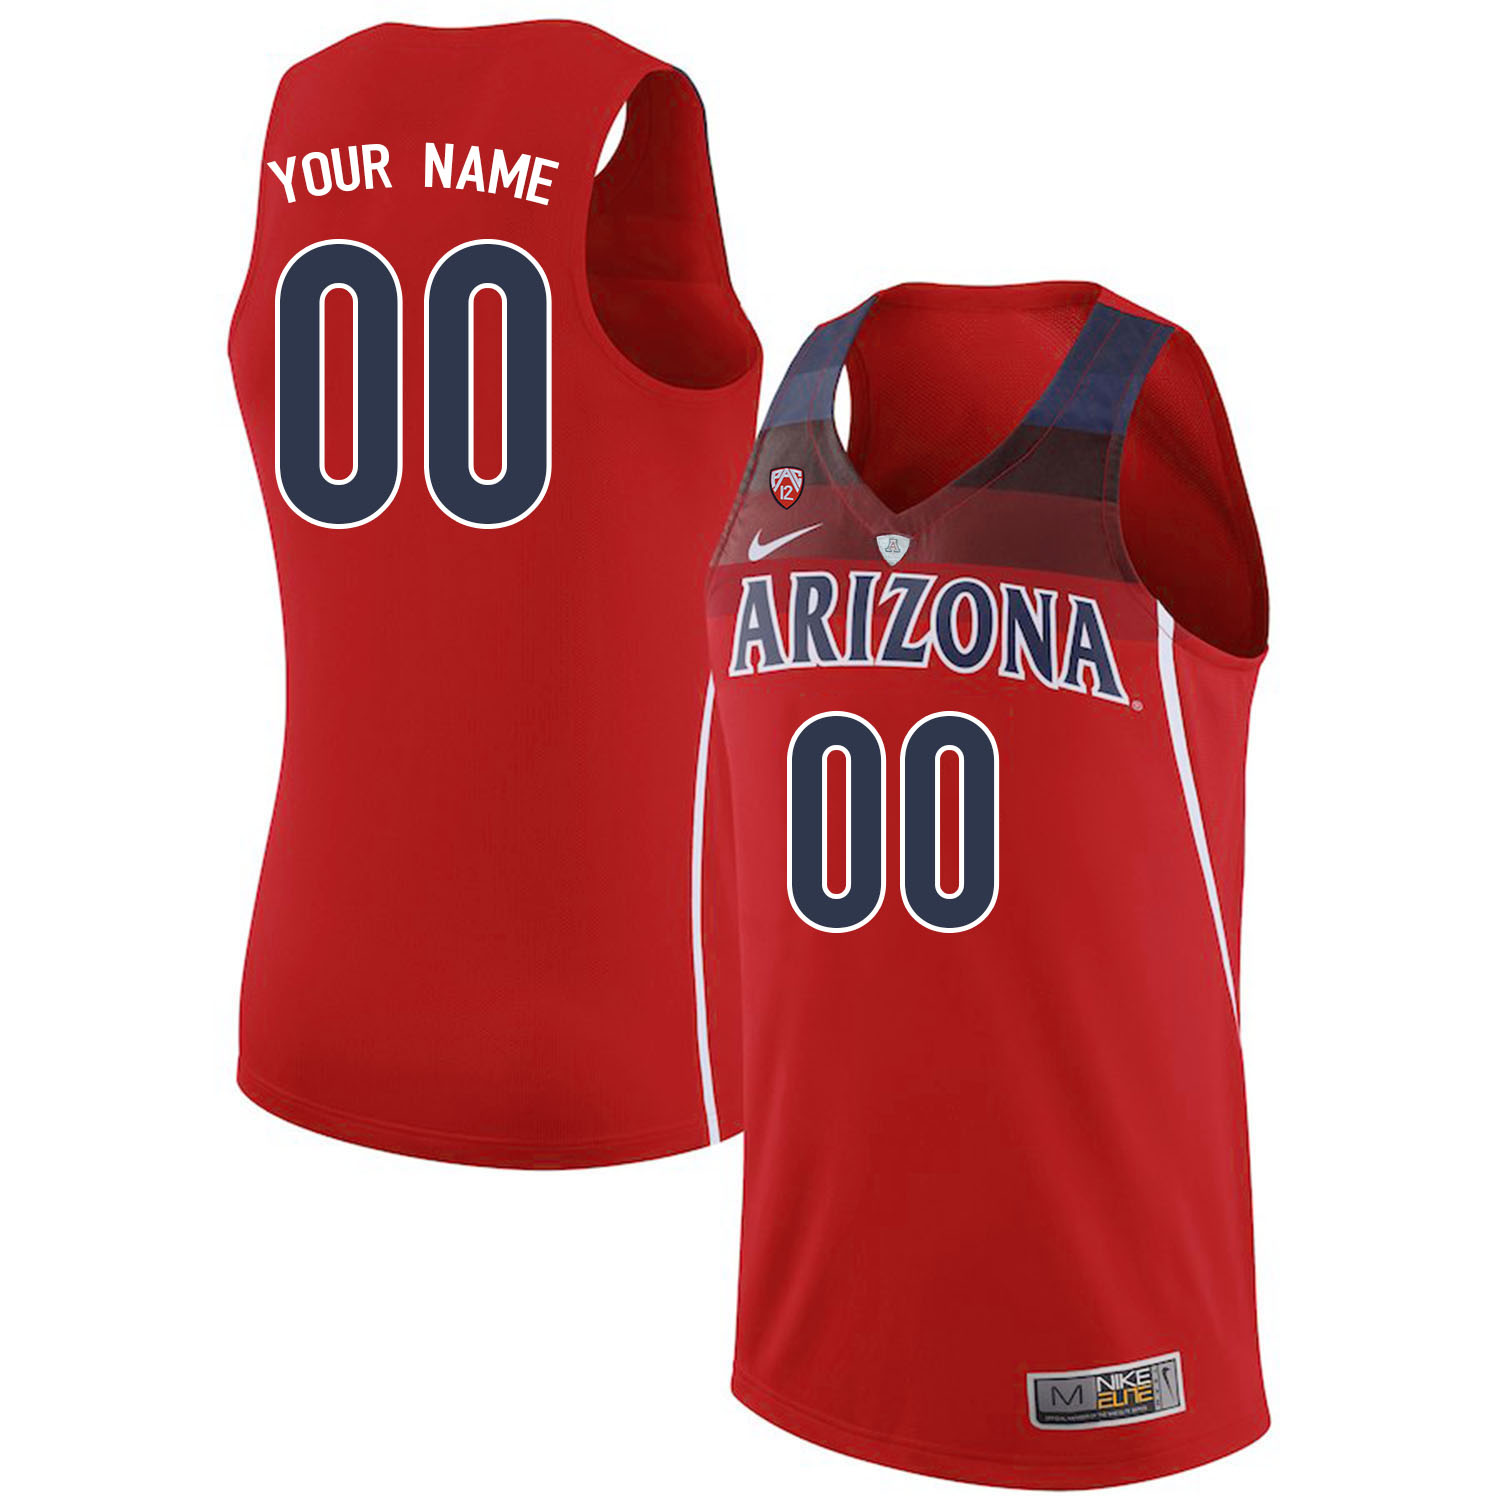 Custom Arizona Wildcats Name And Number College Basketball Jerseys Stitched-Red